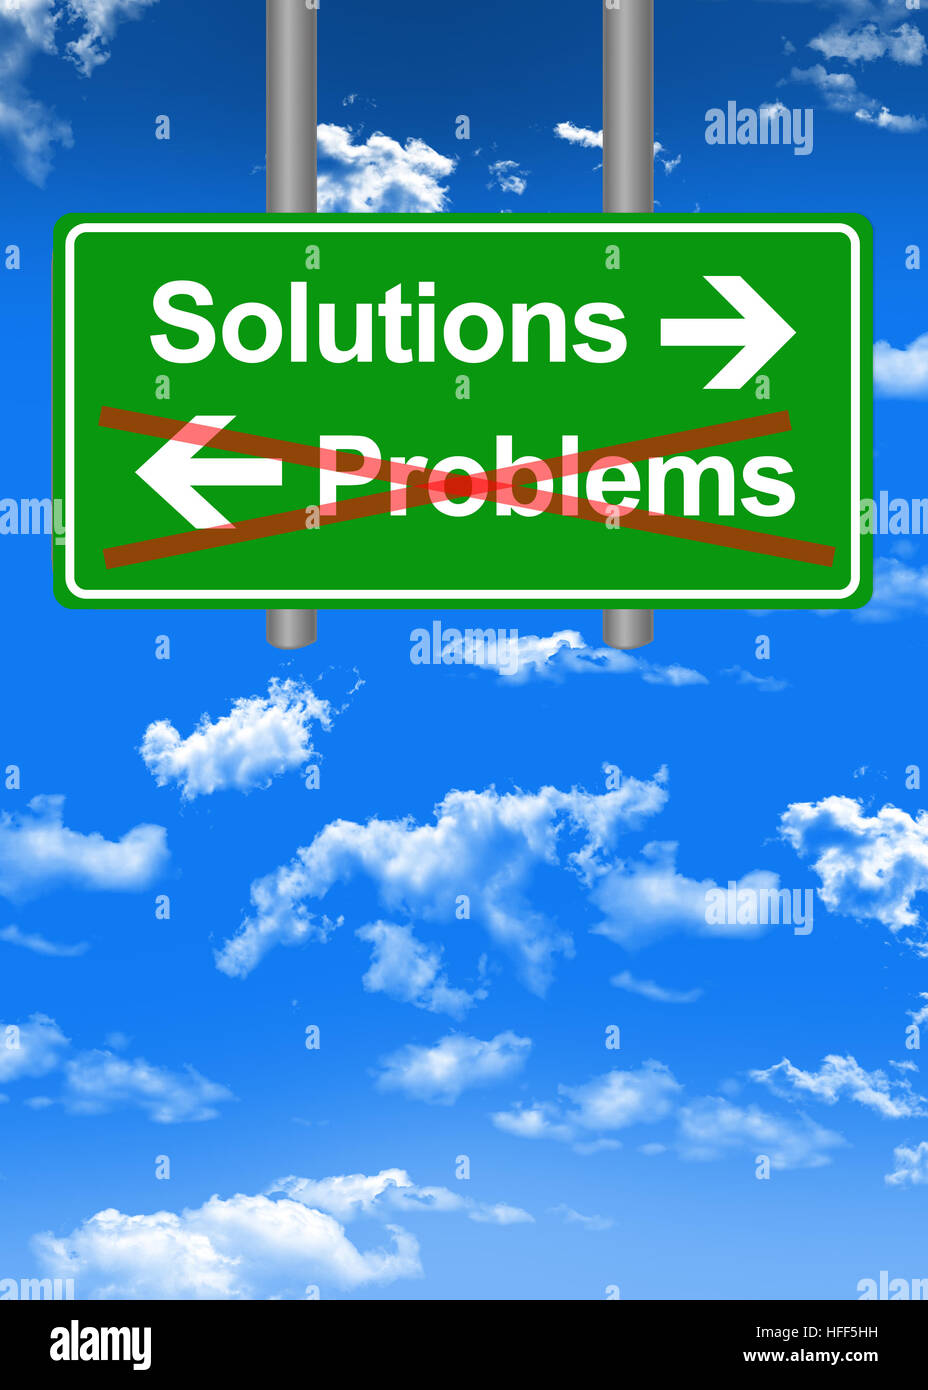 Find solutions to problems concept Stock Photo